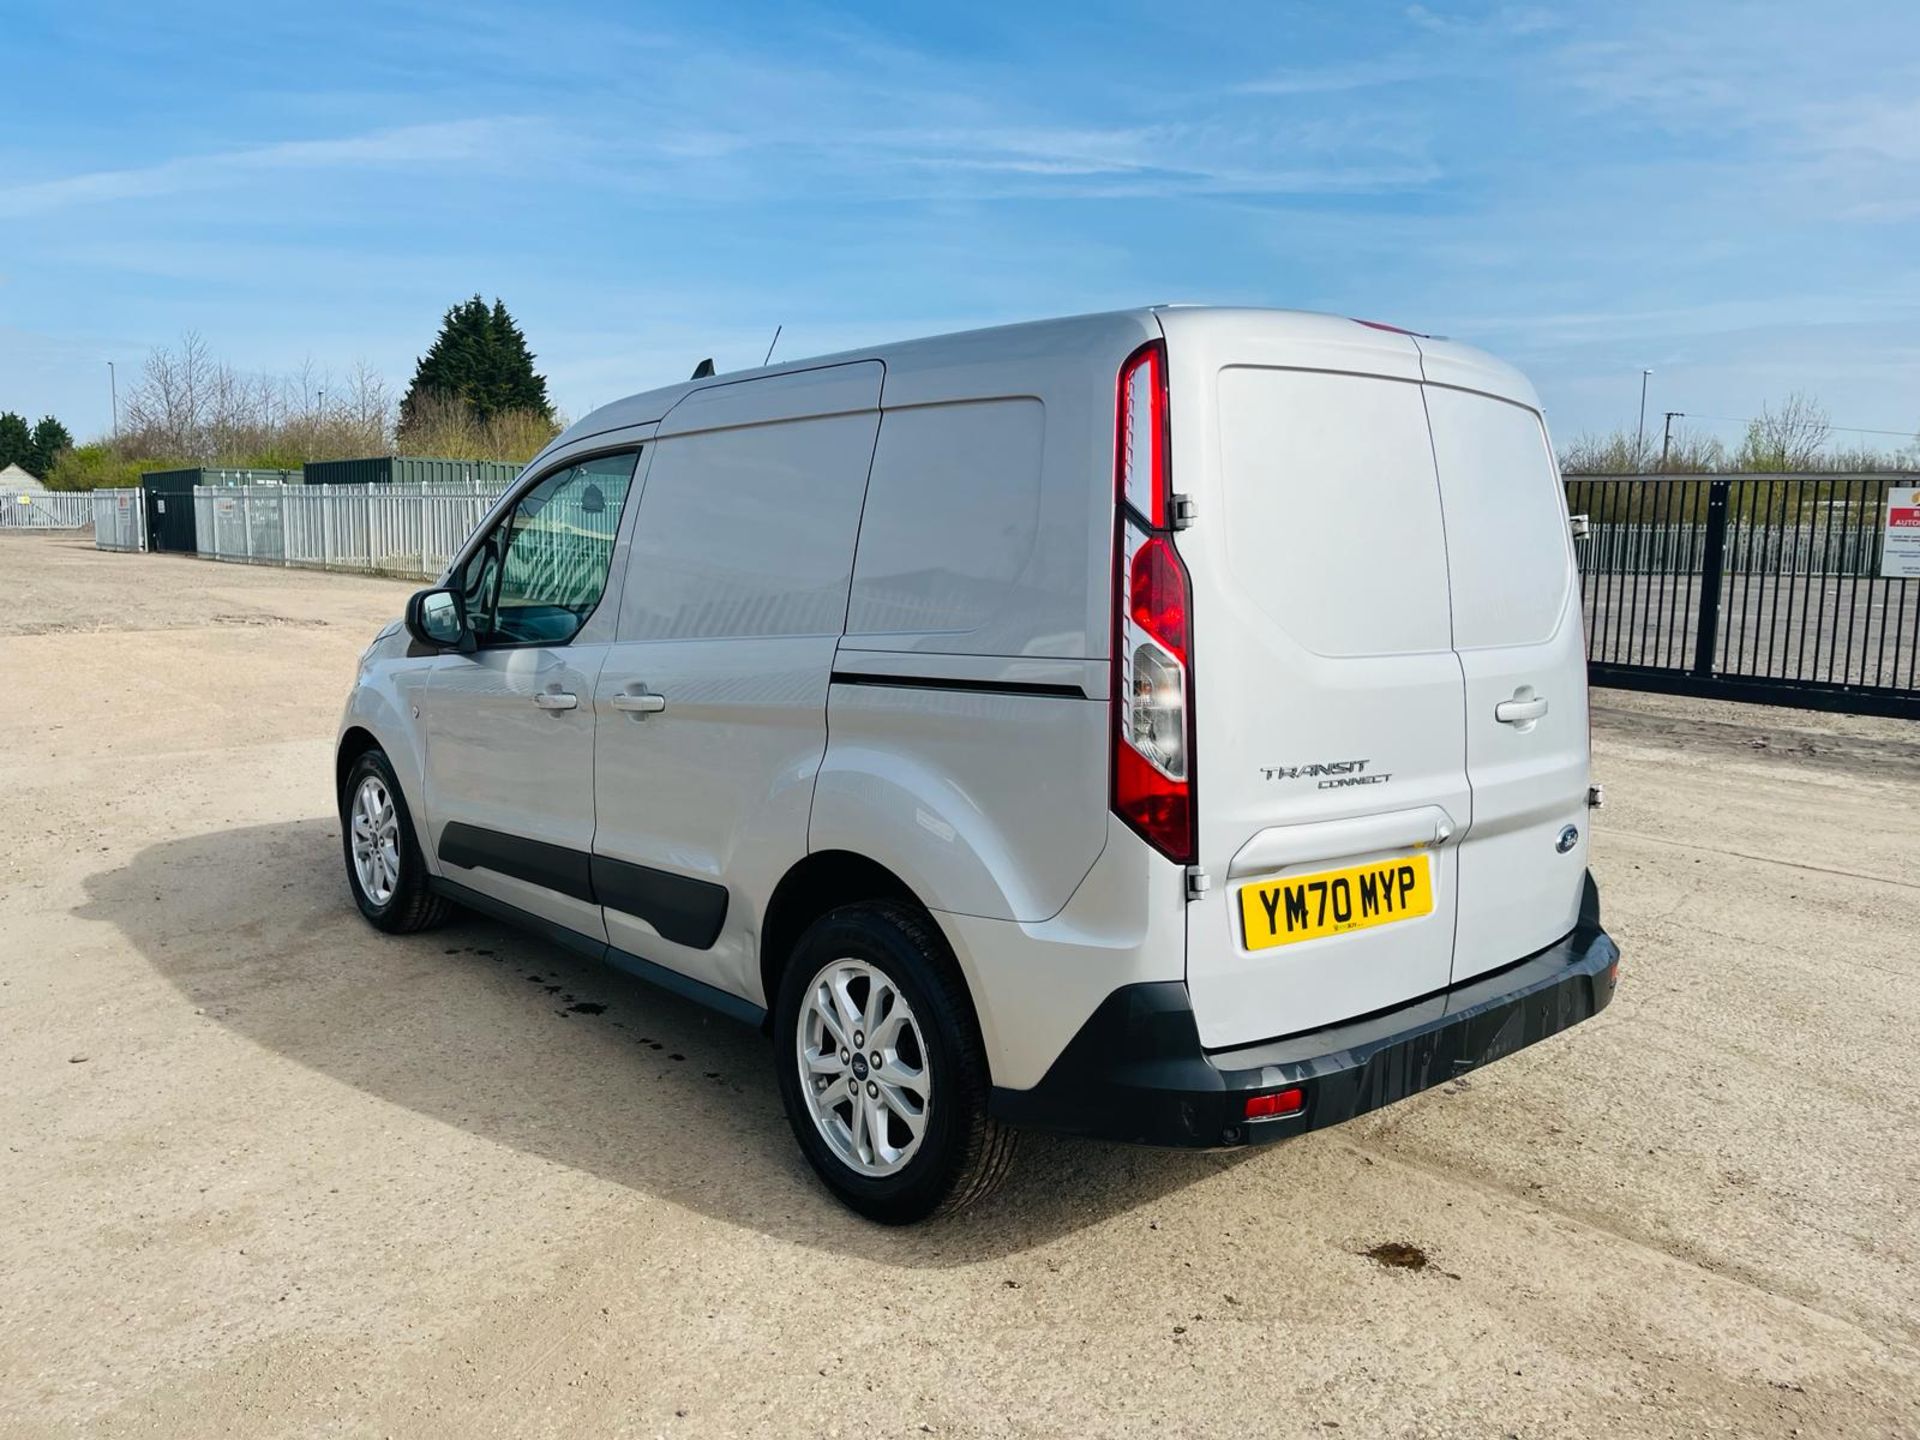 Ford Transit Connect 1.5 TDCI L1H1-2020 '70 Reg'- 1 Previous Owner -Alloy Wheels -Sat Nav - A/C - Image 8 of 28